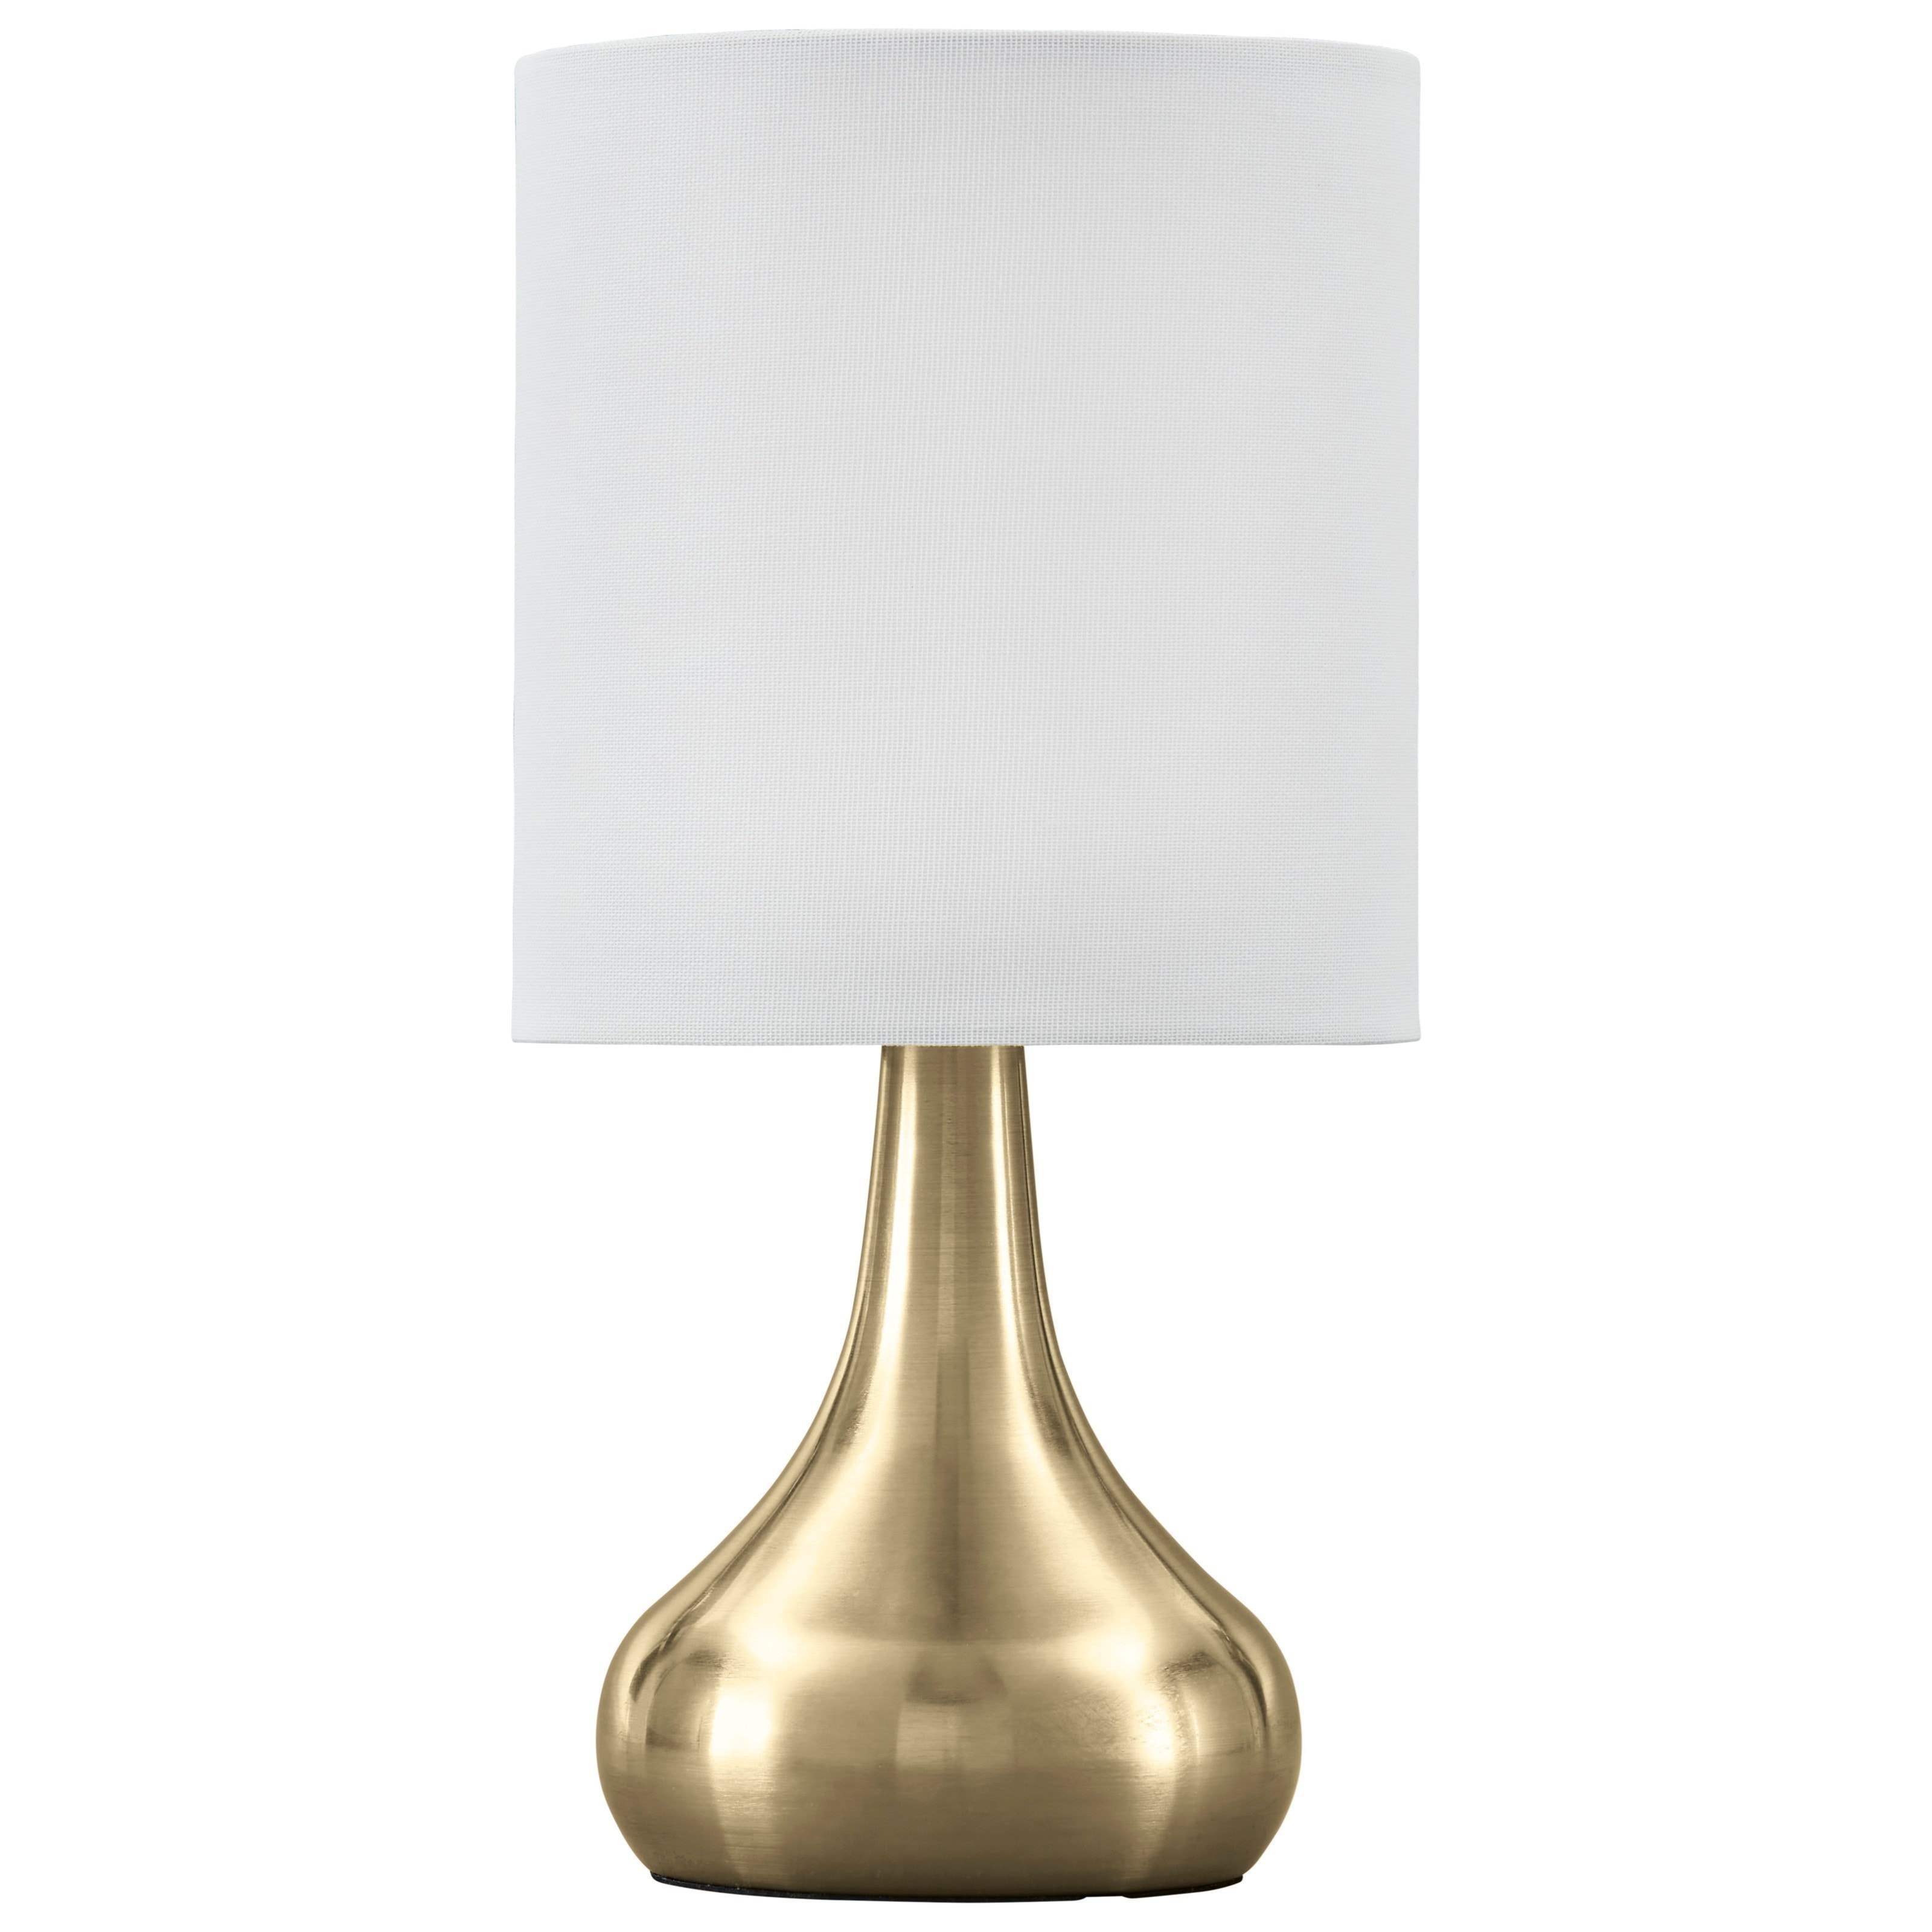 Signature Design by Ashley Lamps Contemporary L204344 Camdale Brass Finish  Metal Table Lamp with USB Charging Arwood's Furniture Table Lamps